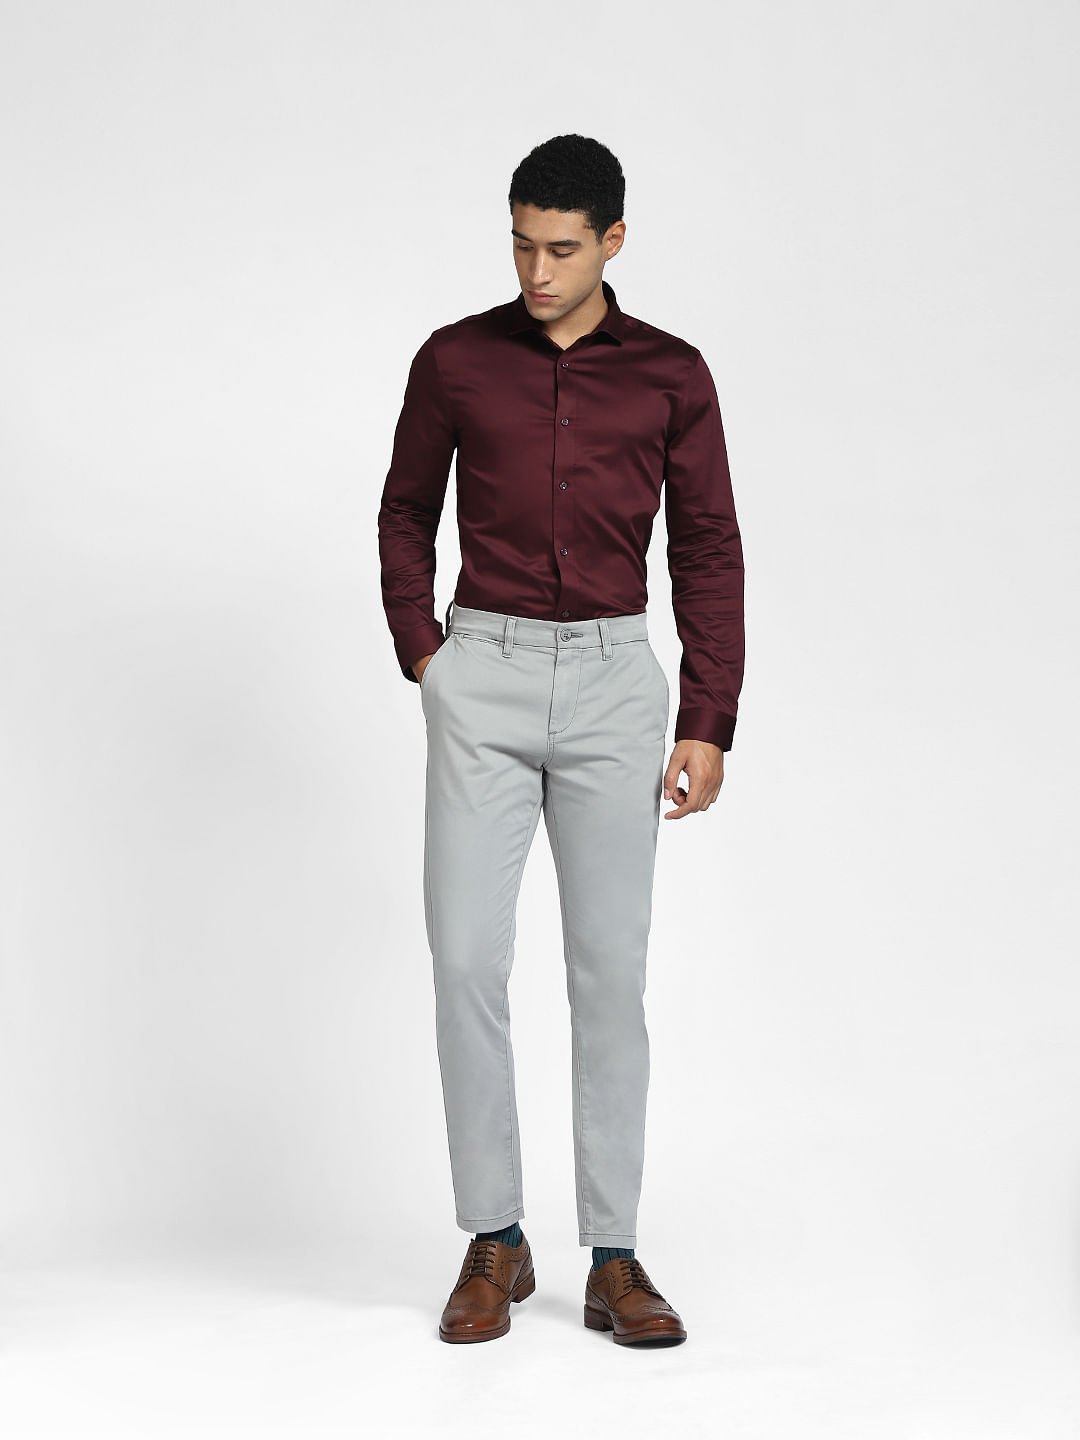 Grey Dress Pants with Burgundy Shirt Outfits For Men (15 ideas & outfits) |  Lookastic